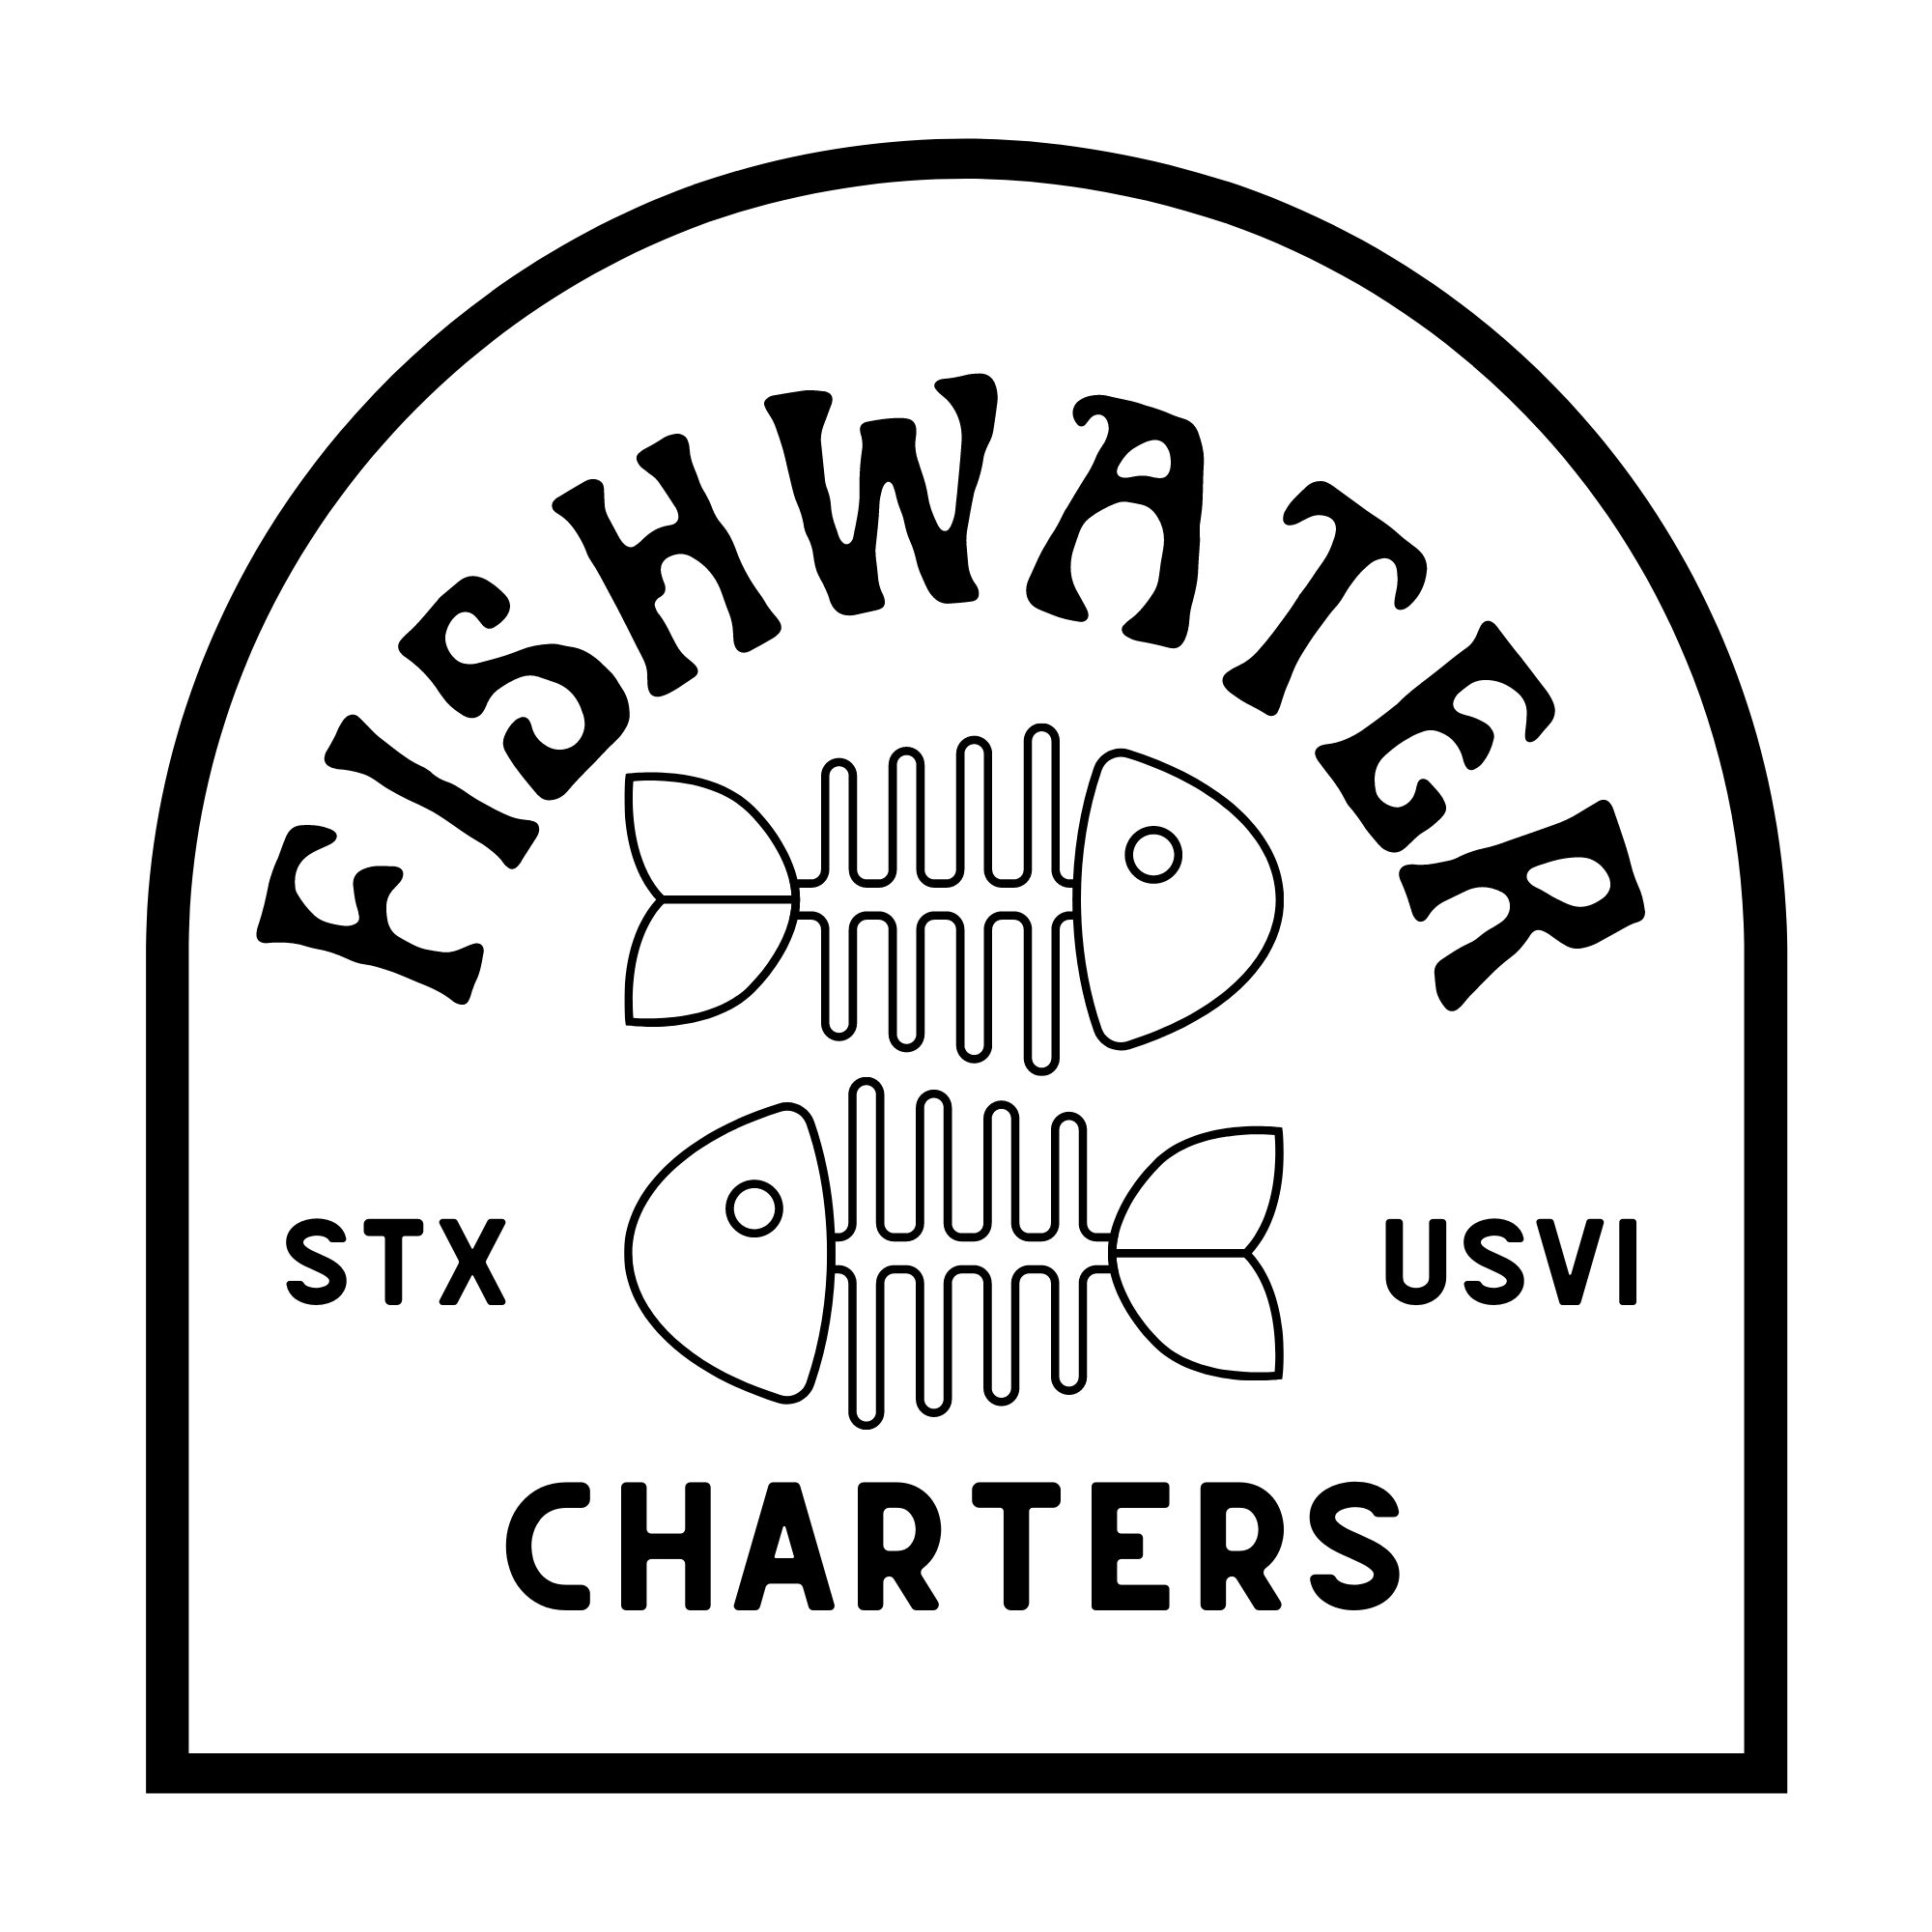 Fishwater Charters